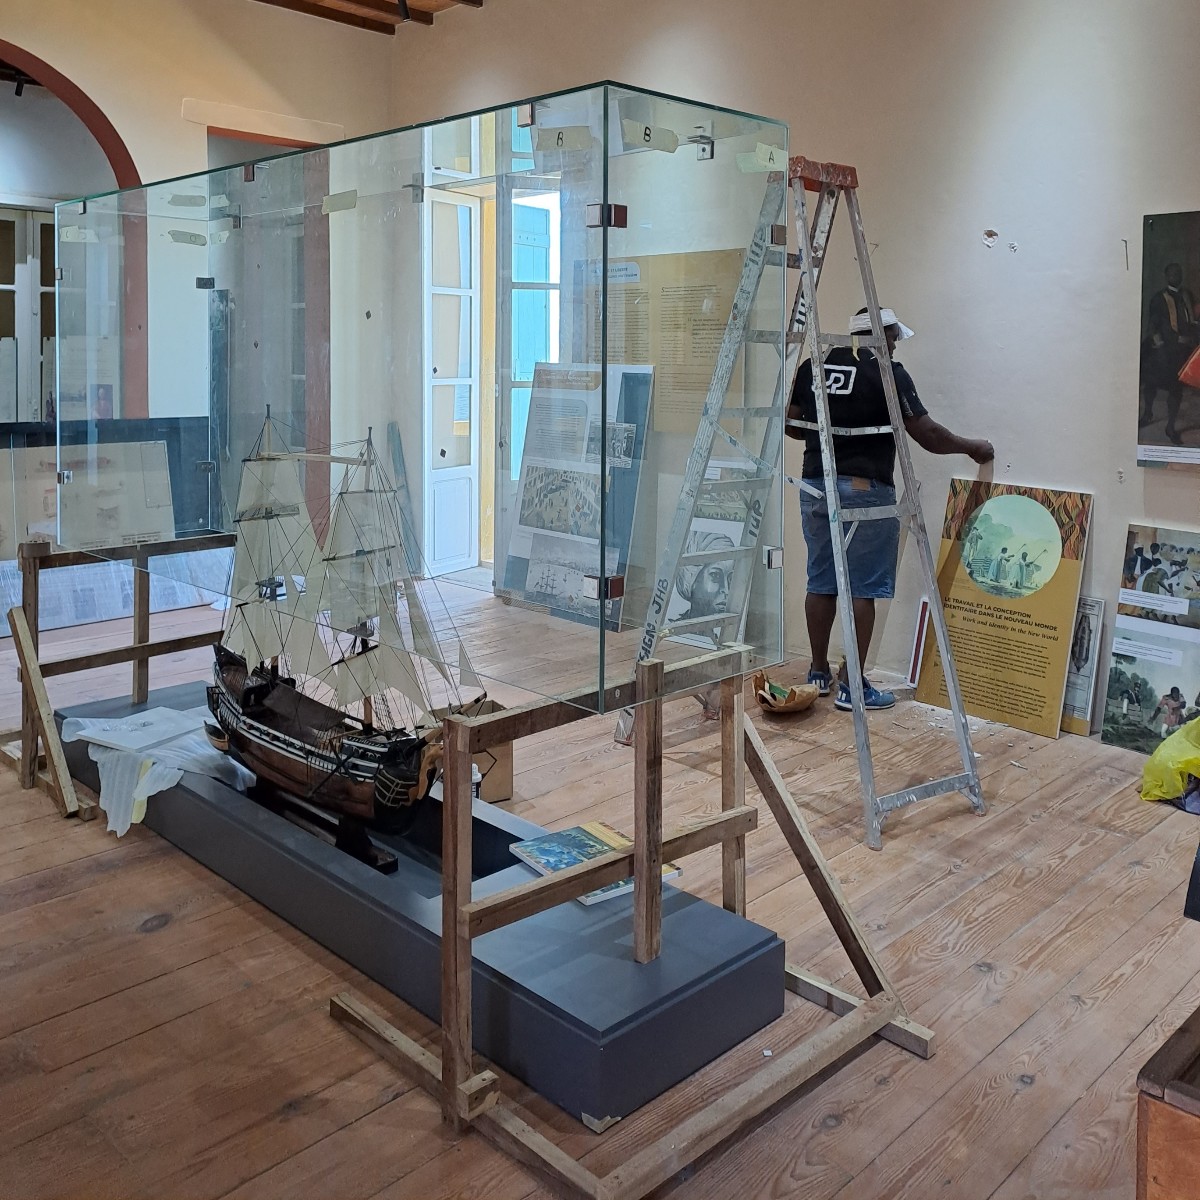 We’ve designed exhibitions ranging from small stands to whole museums, like Senegal’s world-renowned Maison des Esclaves museum. Find out more about our #exhibition expertise here: brnw.ch/21wJbZR #FlowCommunications #FlowComms